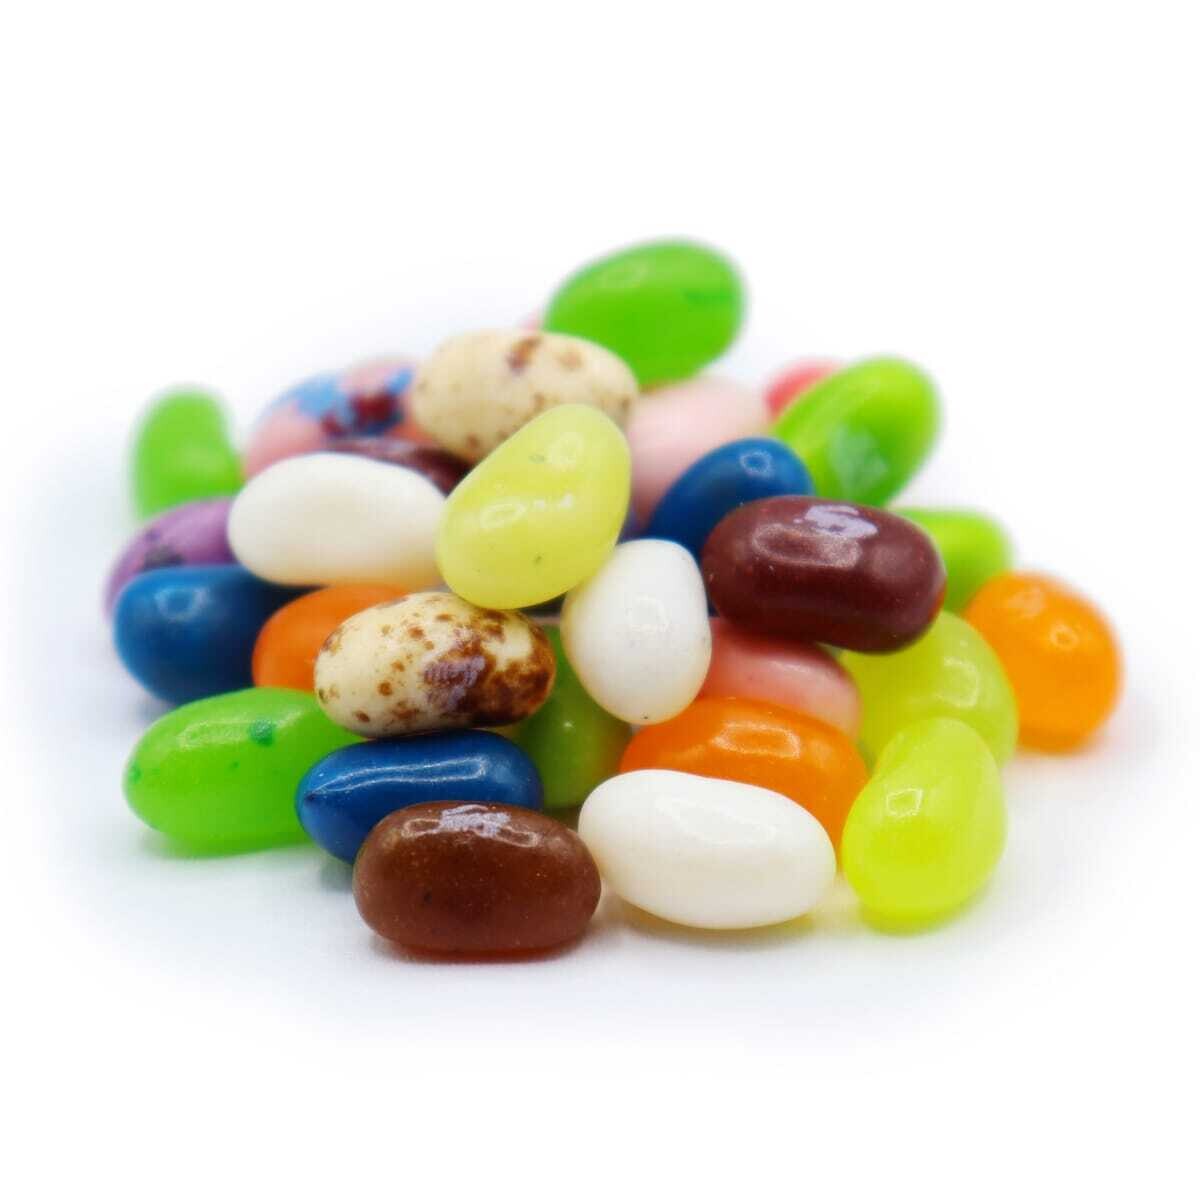 49 FLAVORS - Jelly Belly Jelly Beans